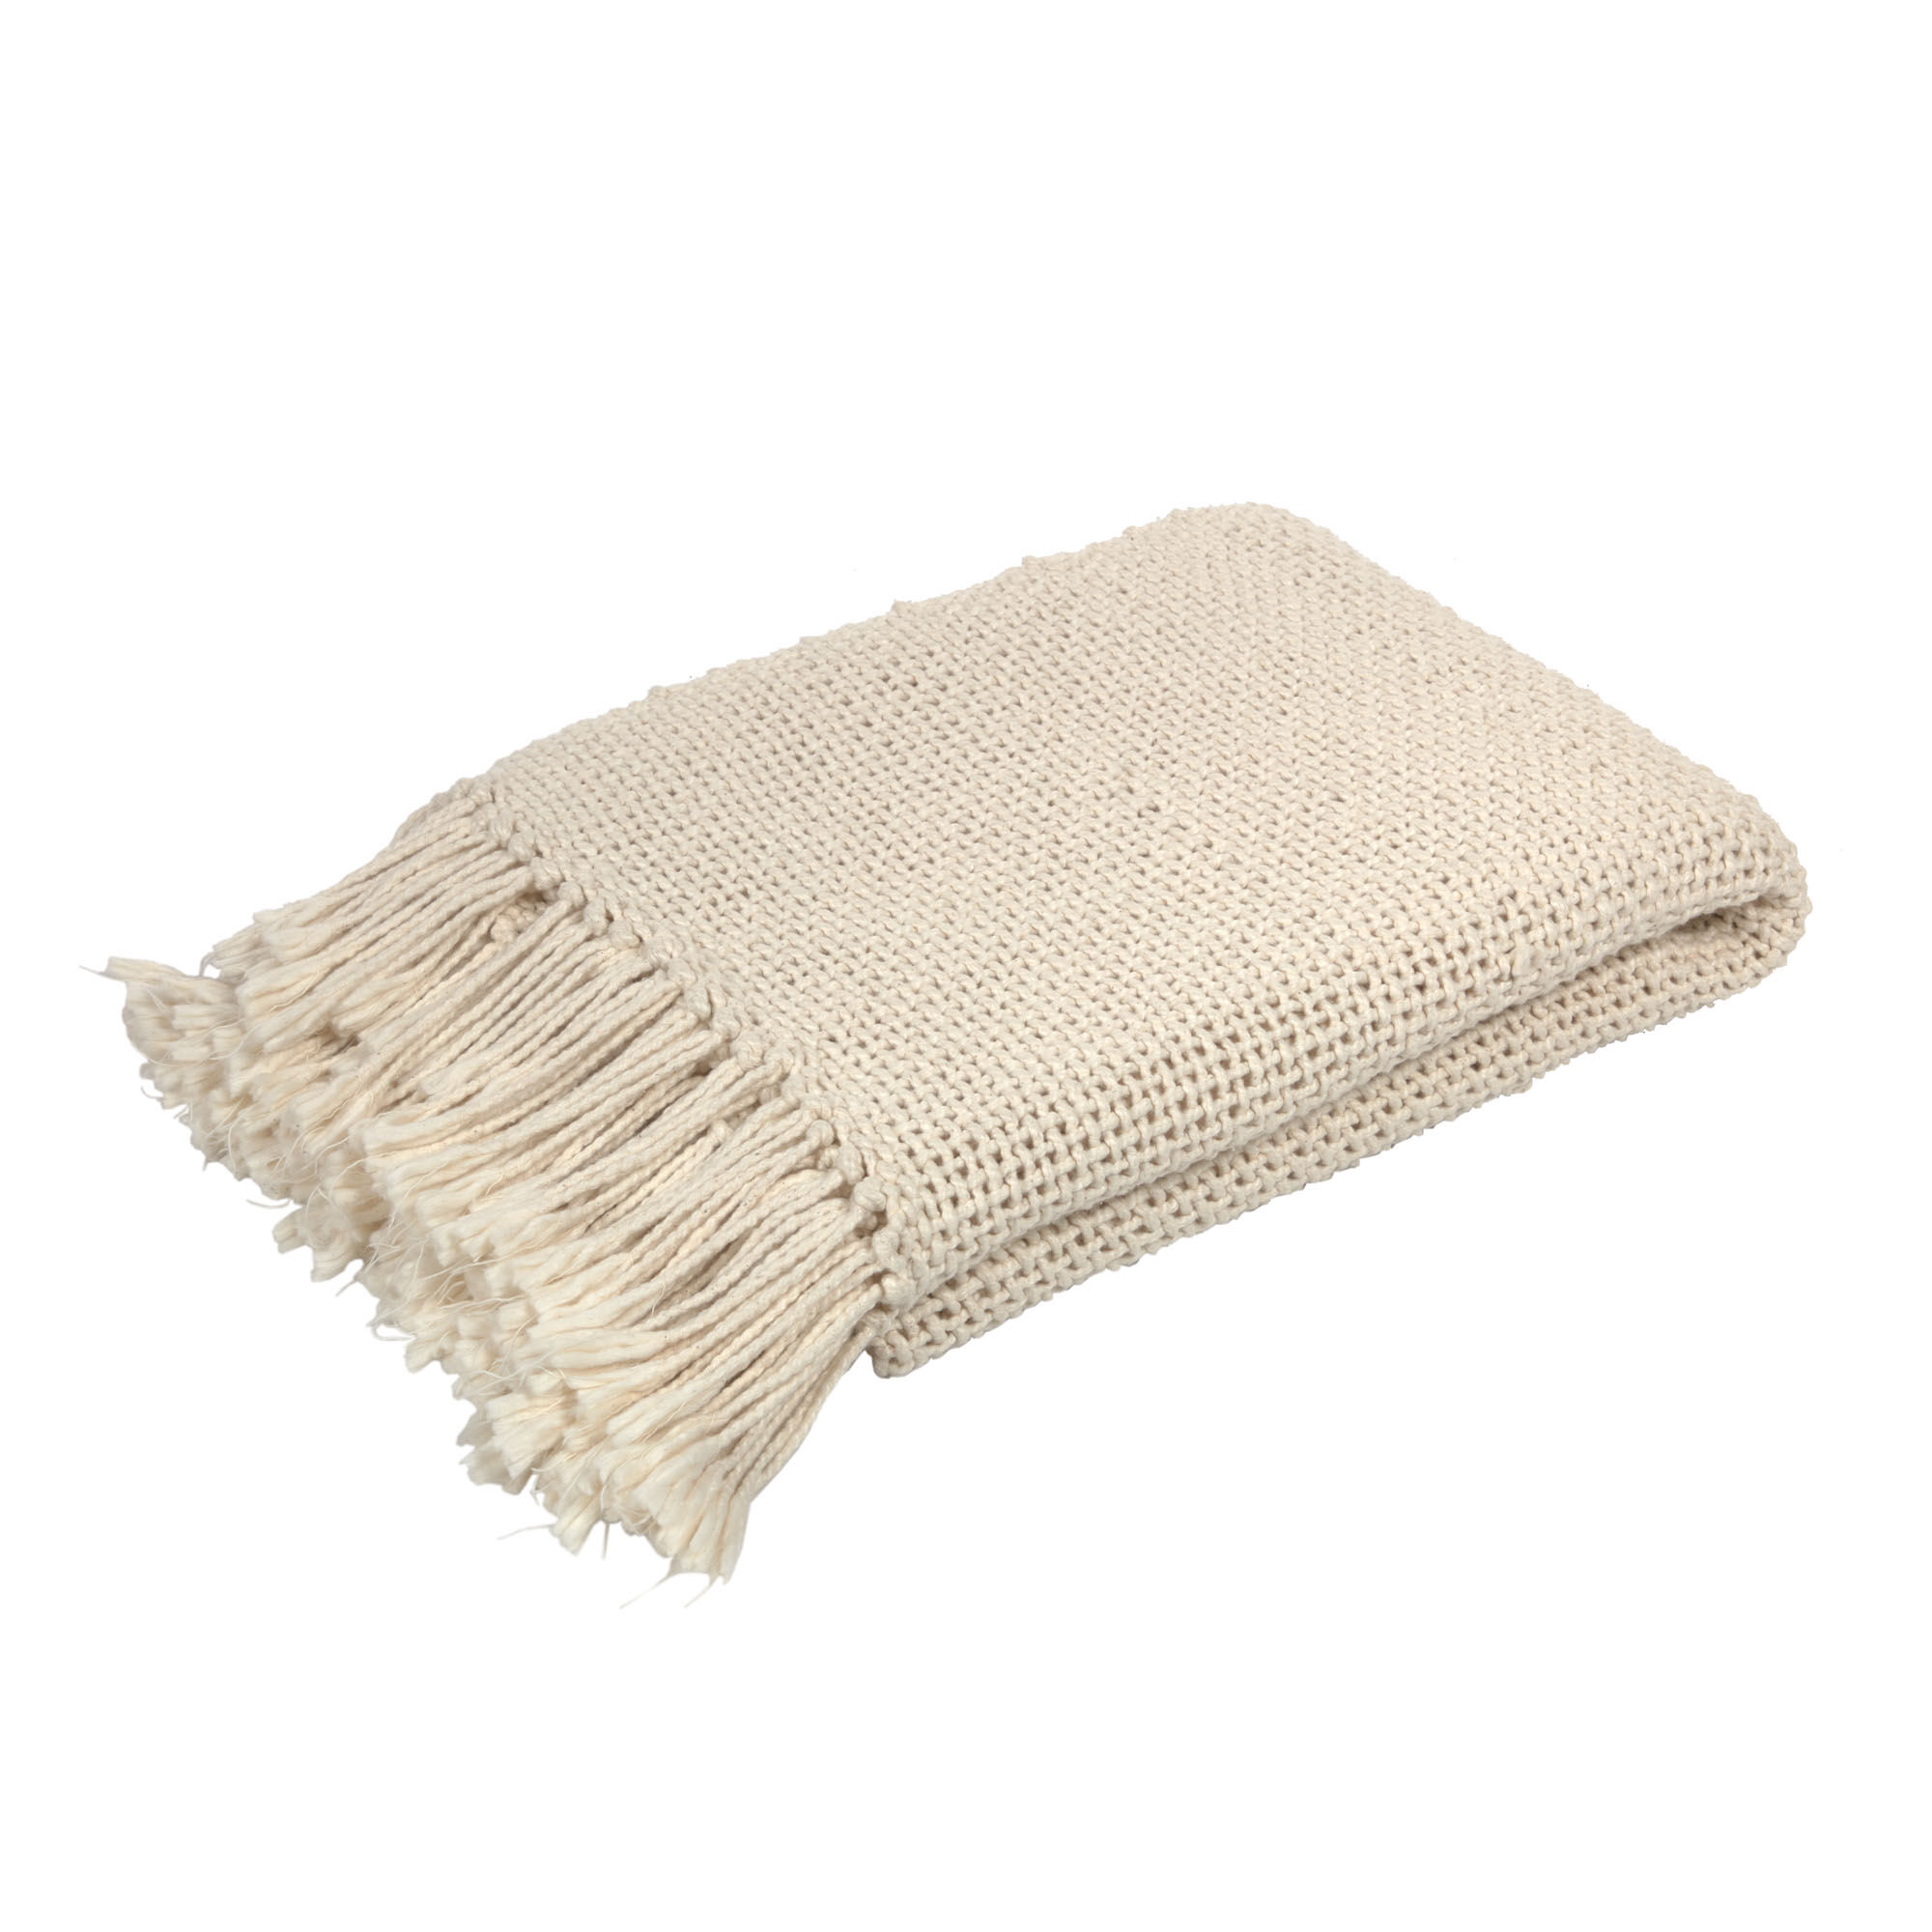 Kave Home Pearle blanket 130 x 170 cm